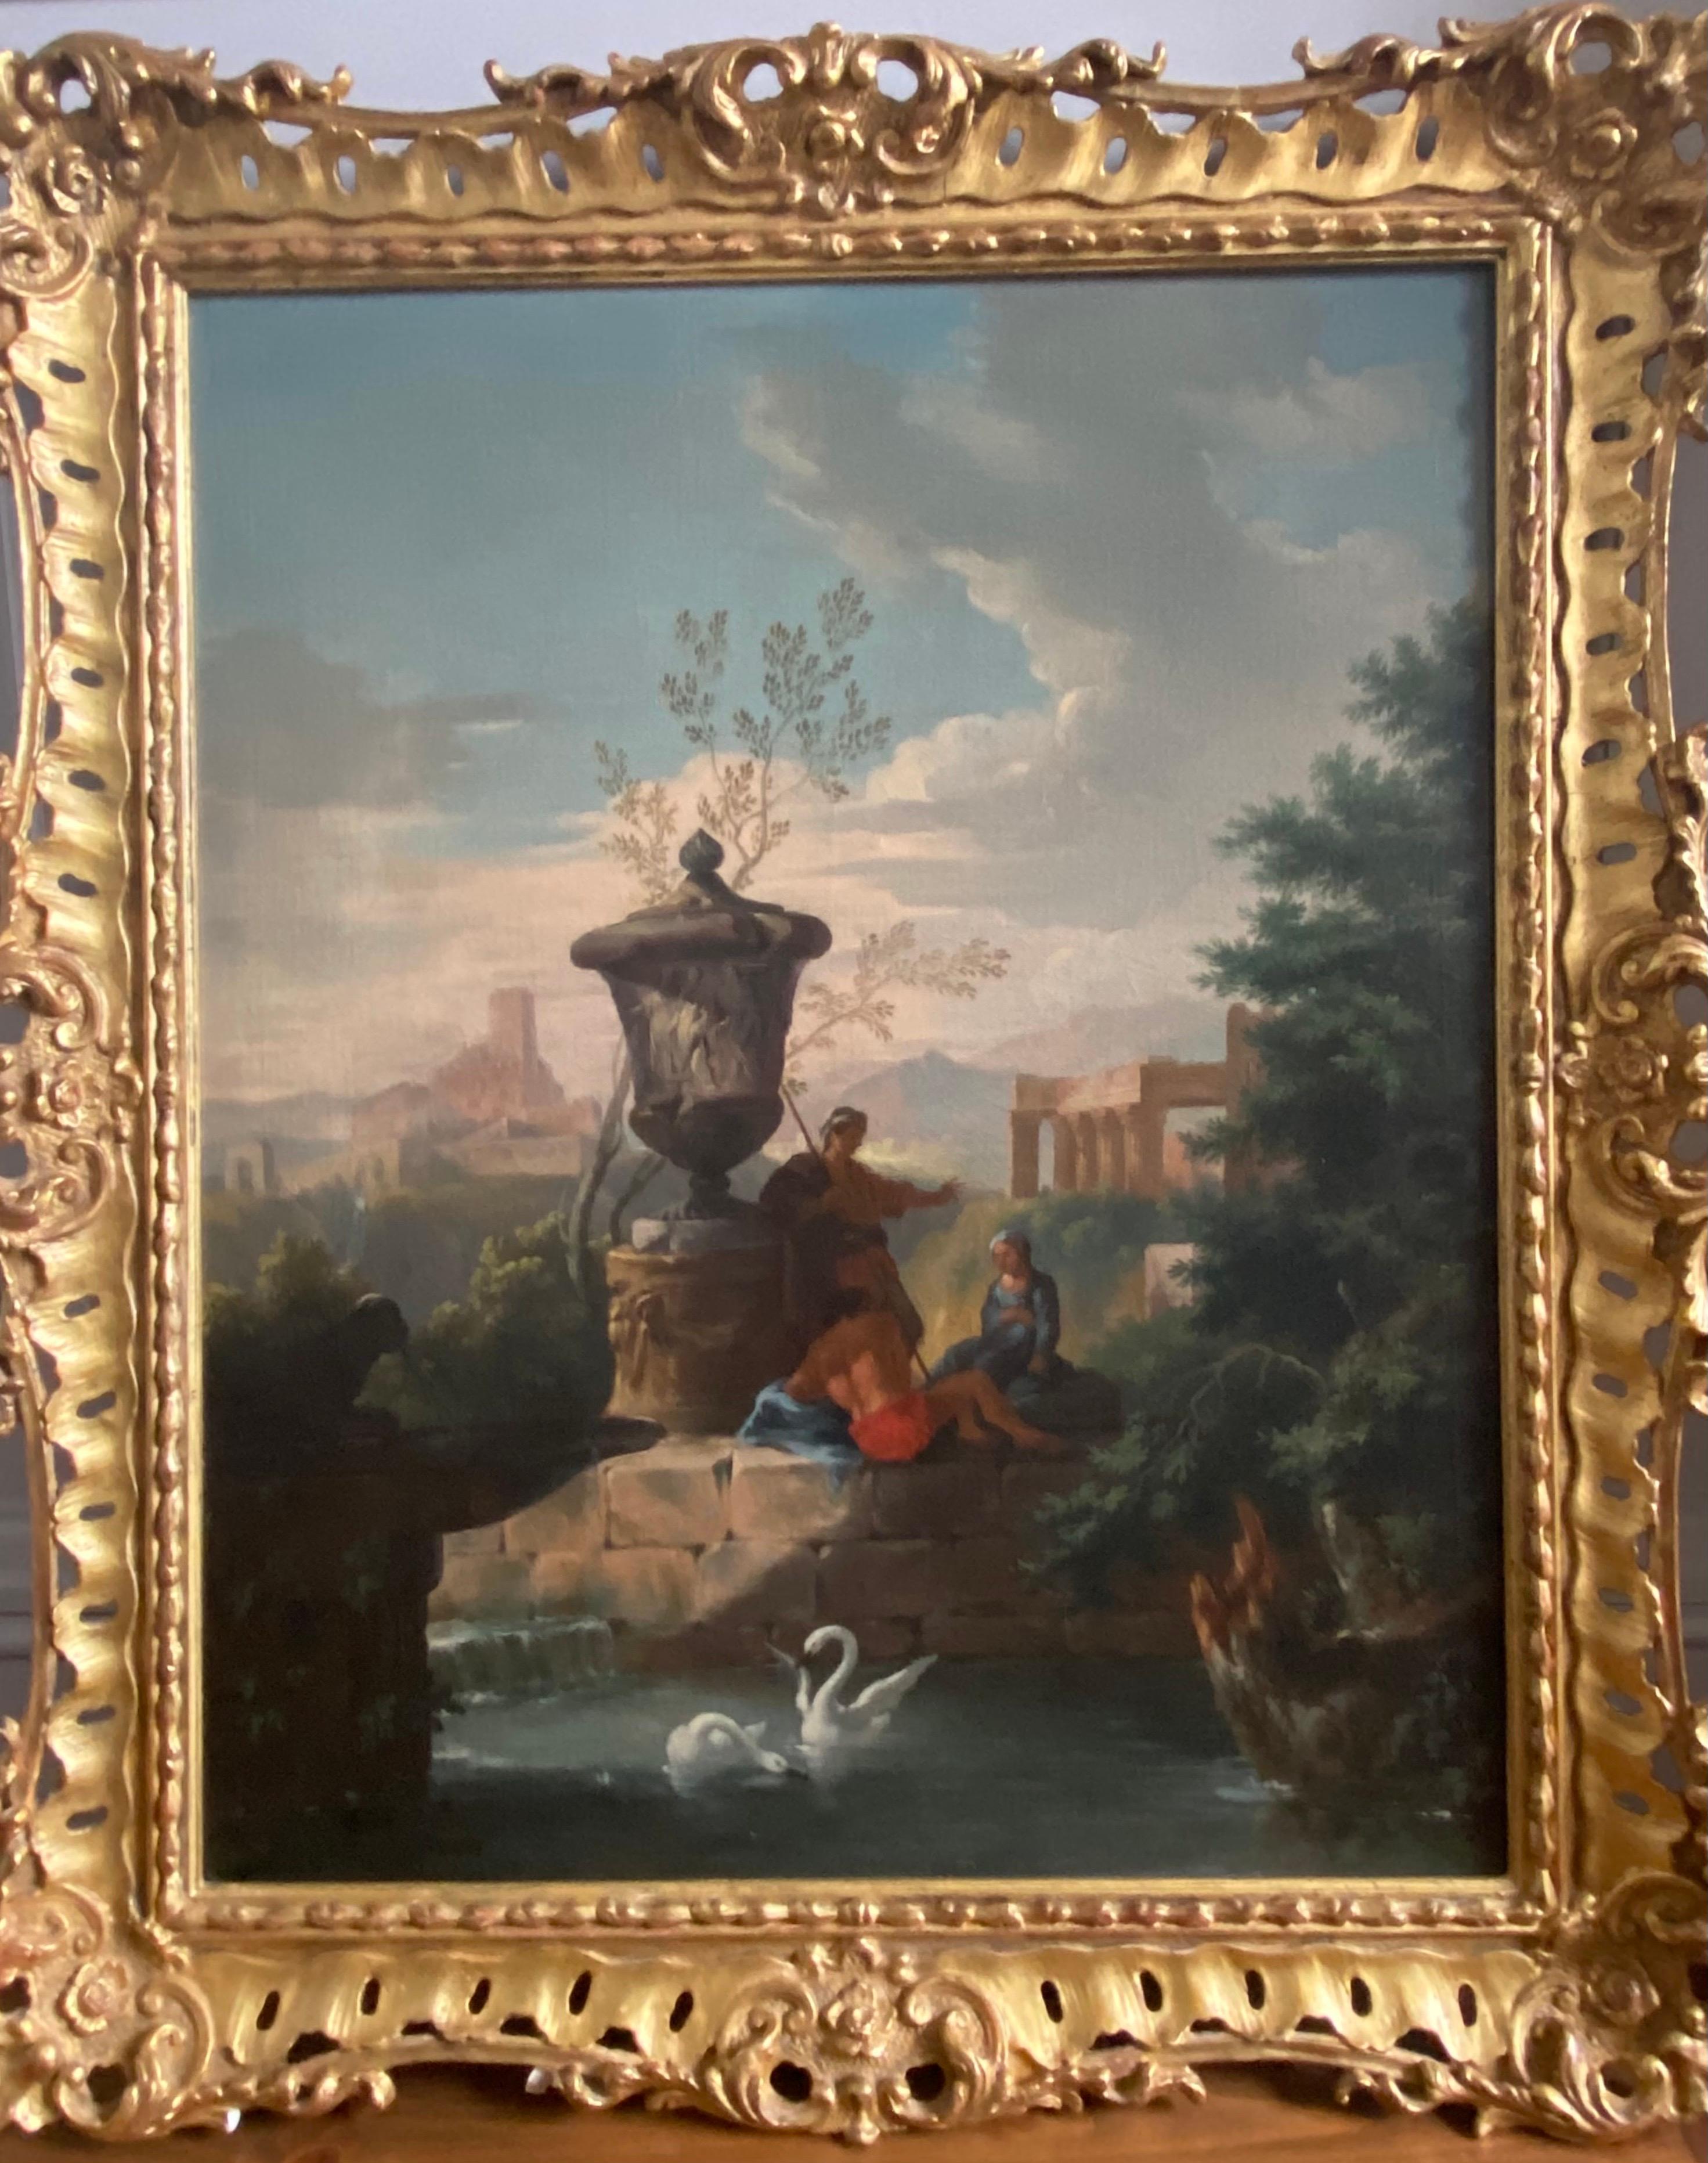 Pair of 19th century Italian capriccio landscape paintings, Follower of Panini - Old Masters Painting by Giovanni Paolo Panini